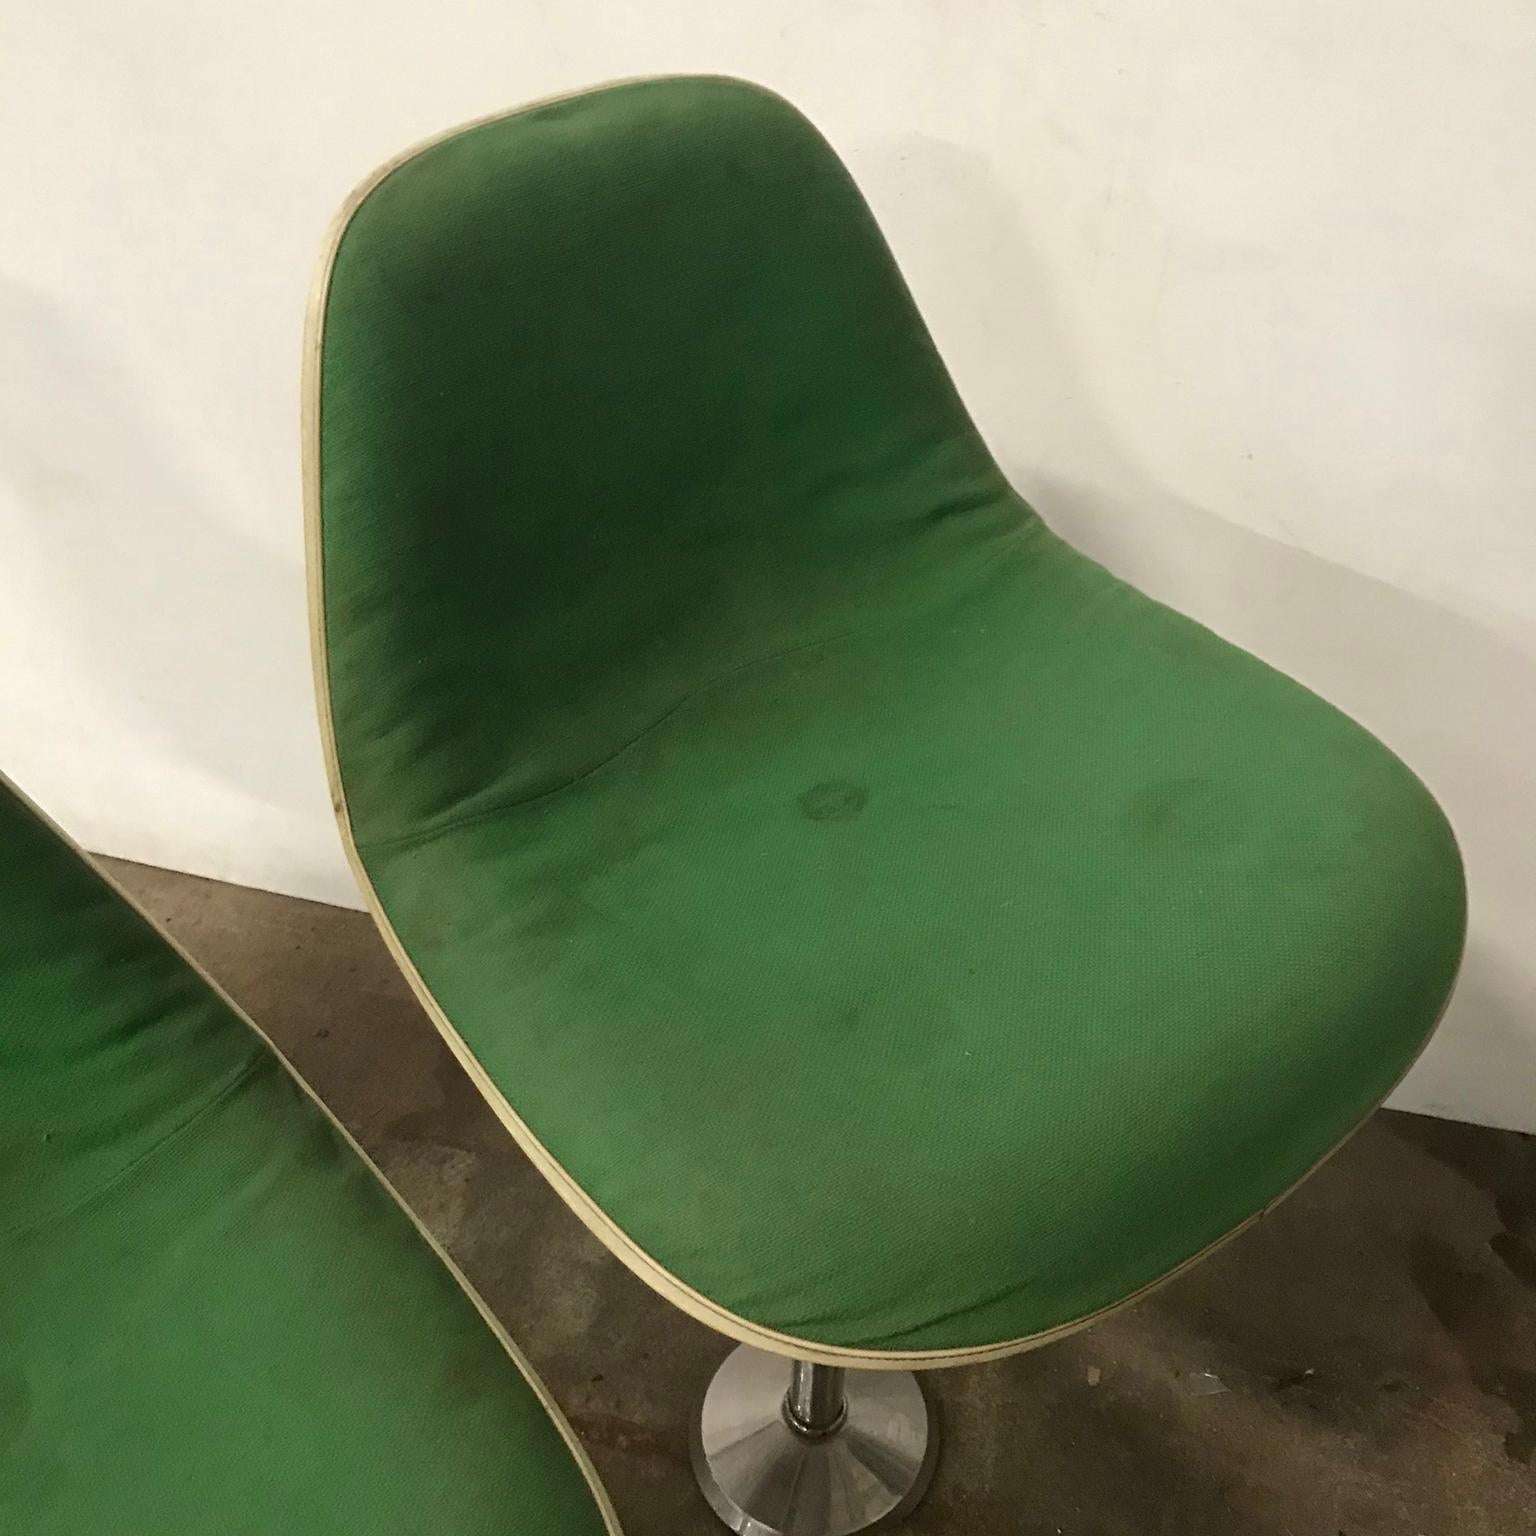 1969 Eames Herman Miller/Fehlbaum Extremely Rare White Barstools in Green Fabric For Sale 3